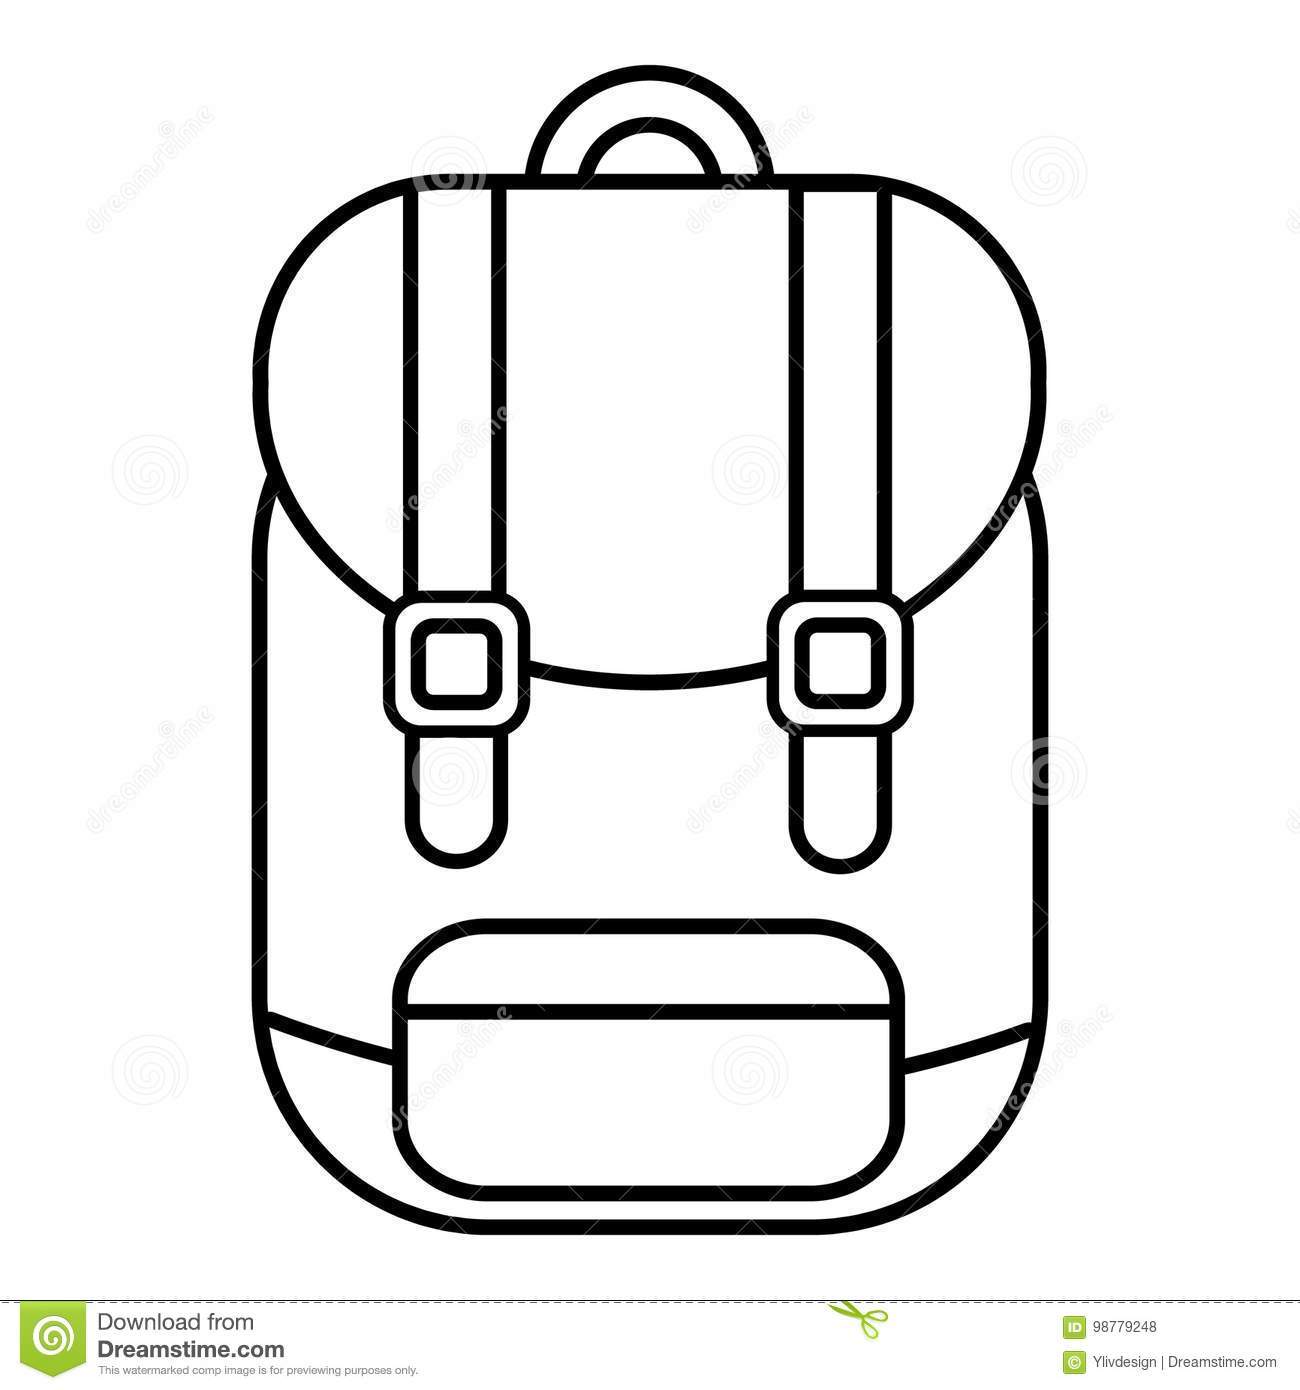 Backpack Clip Art Black And White - Free Backpack Clipart, Download ...